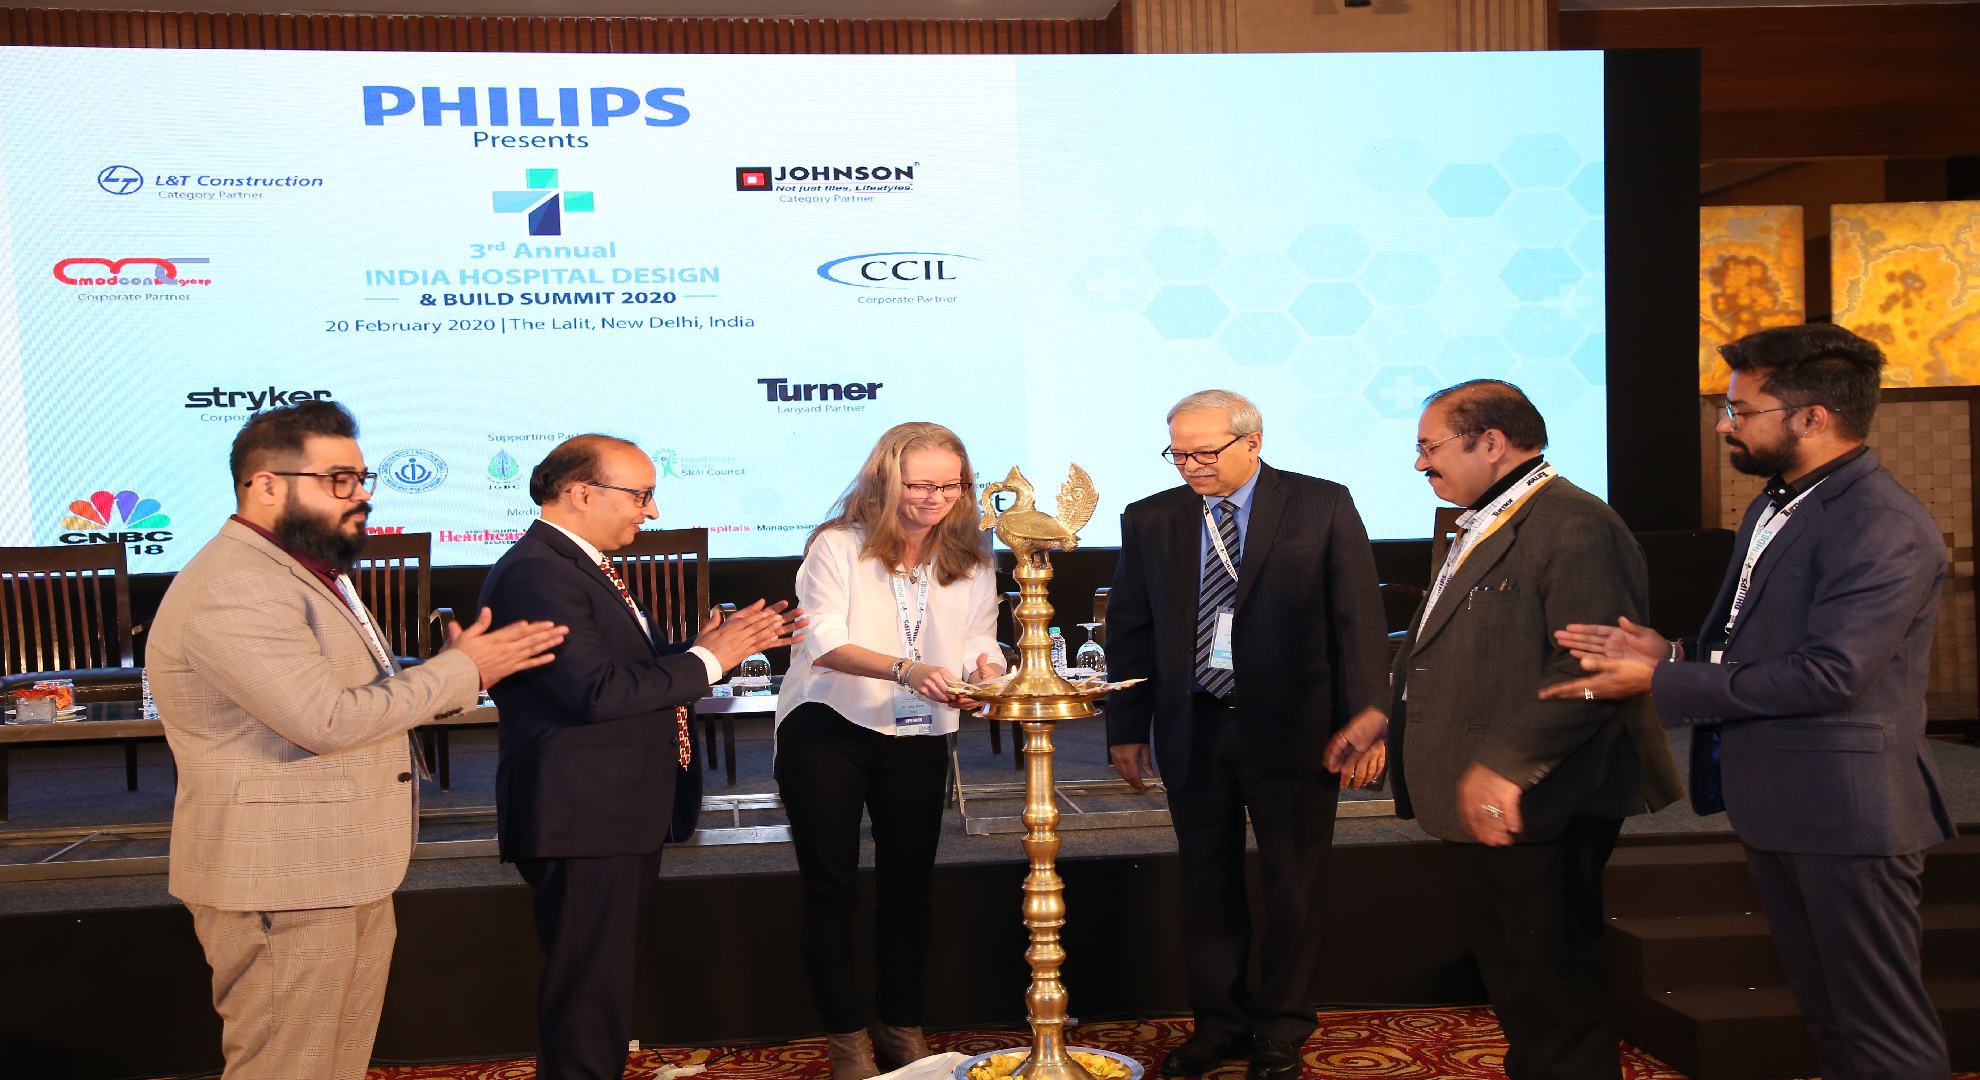 Philips unveils its ‘Hospital of the Future’ vision at India Hospital Design & Build Summit 2020